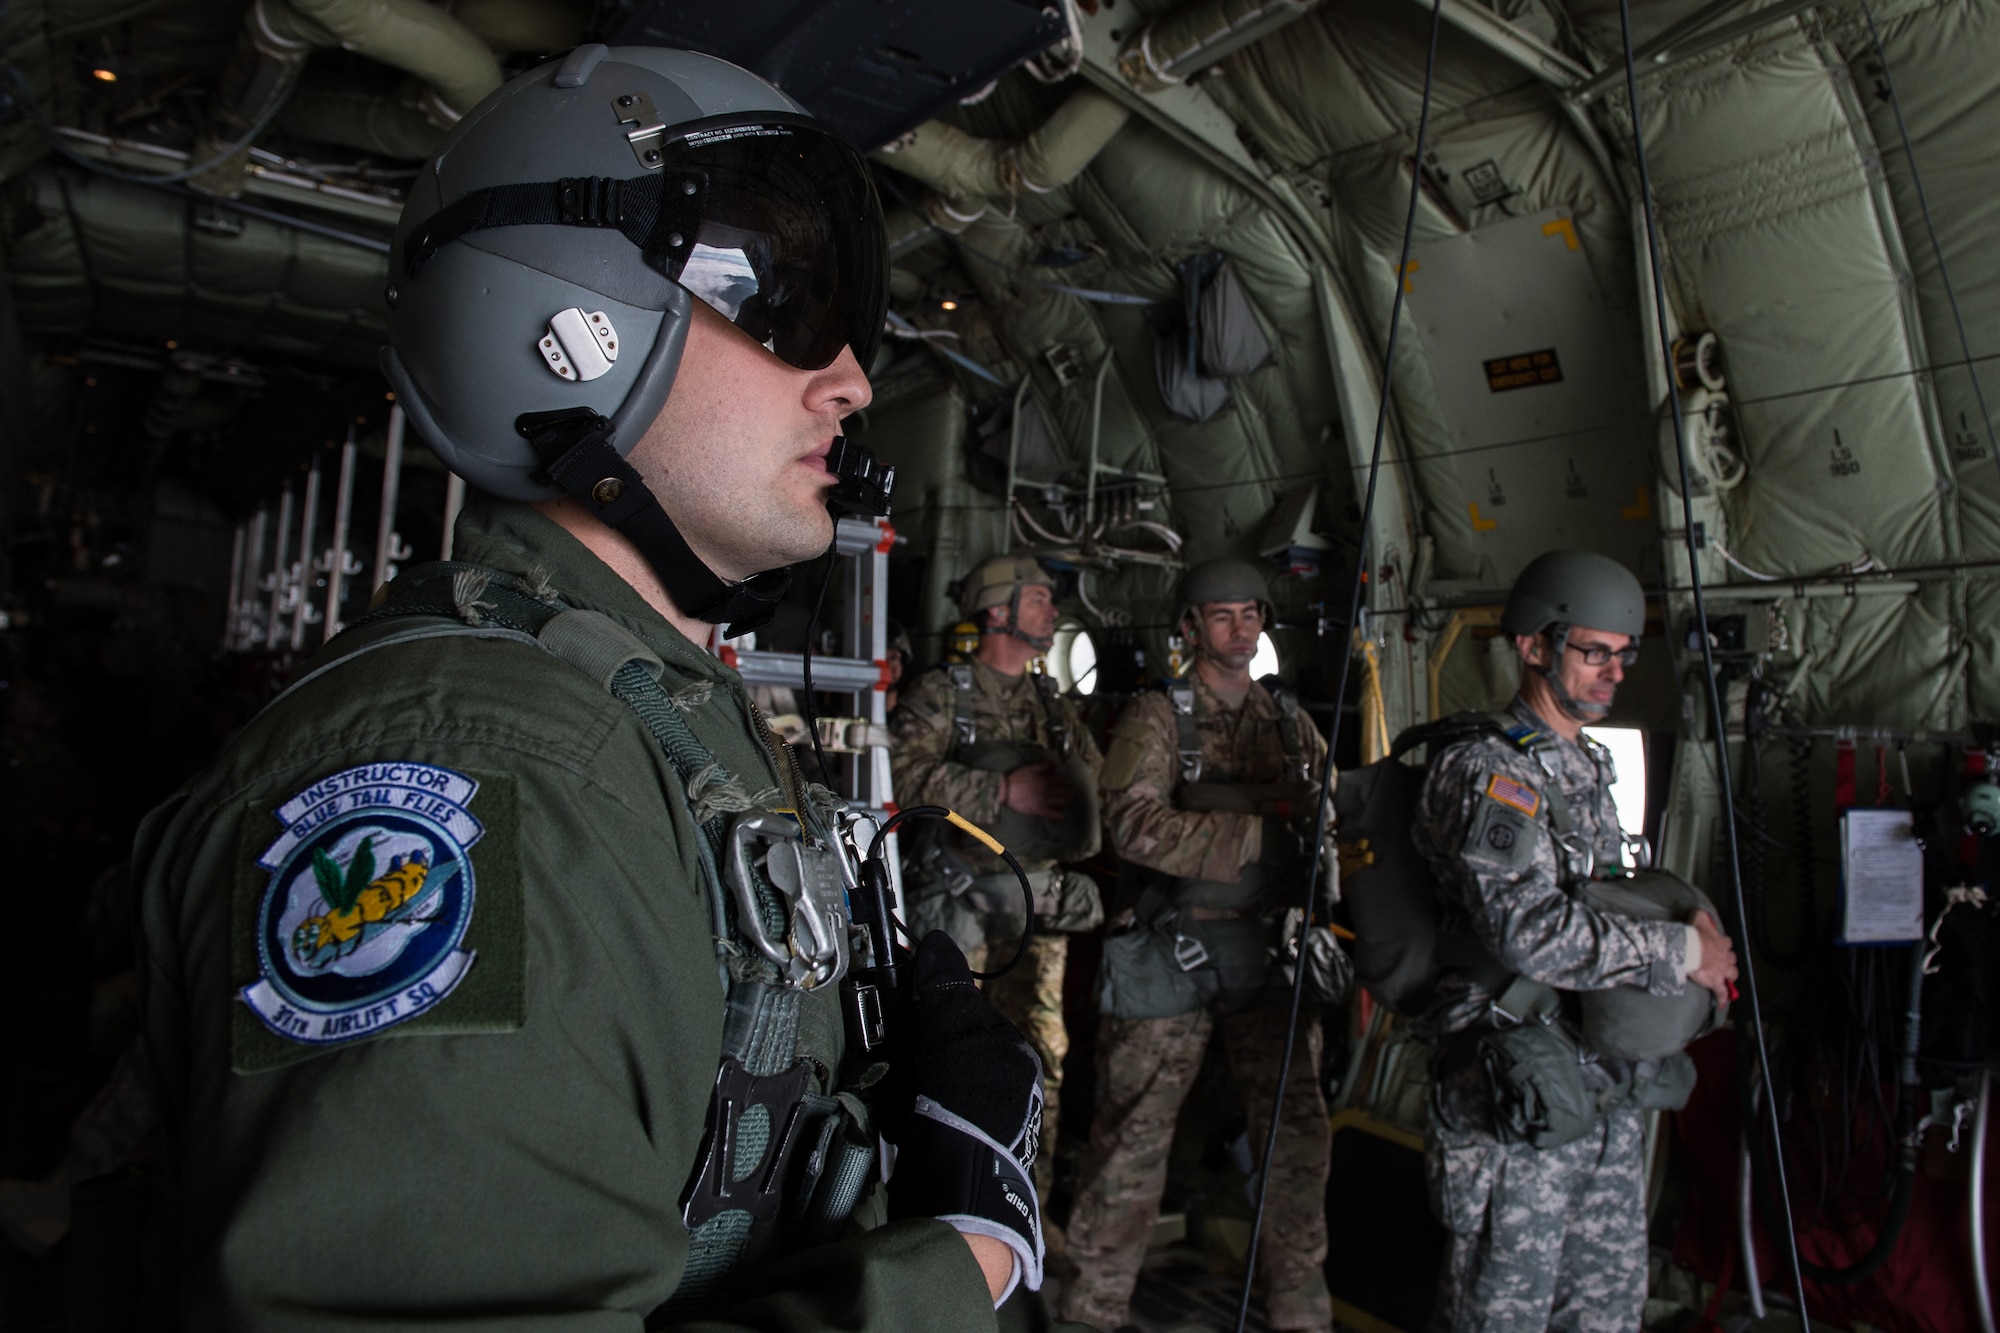 Senior Airman Anthony Oldham, 37th Airlift Squadron loadmaster, prepares Soldiers to jump from a C-130J Hercules over the skies of Germany, Sept. 21, 2016. Oldham saved the life of a local civilian while on temporary assignment to Poland by pinching off the man’s jugular vein, Oct. 17, 2015. (U.S. Air Force photo by Senior Airman Nesha Humes)